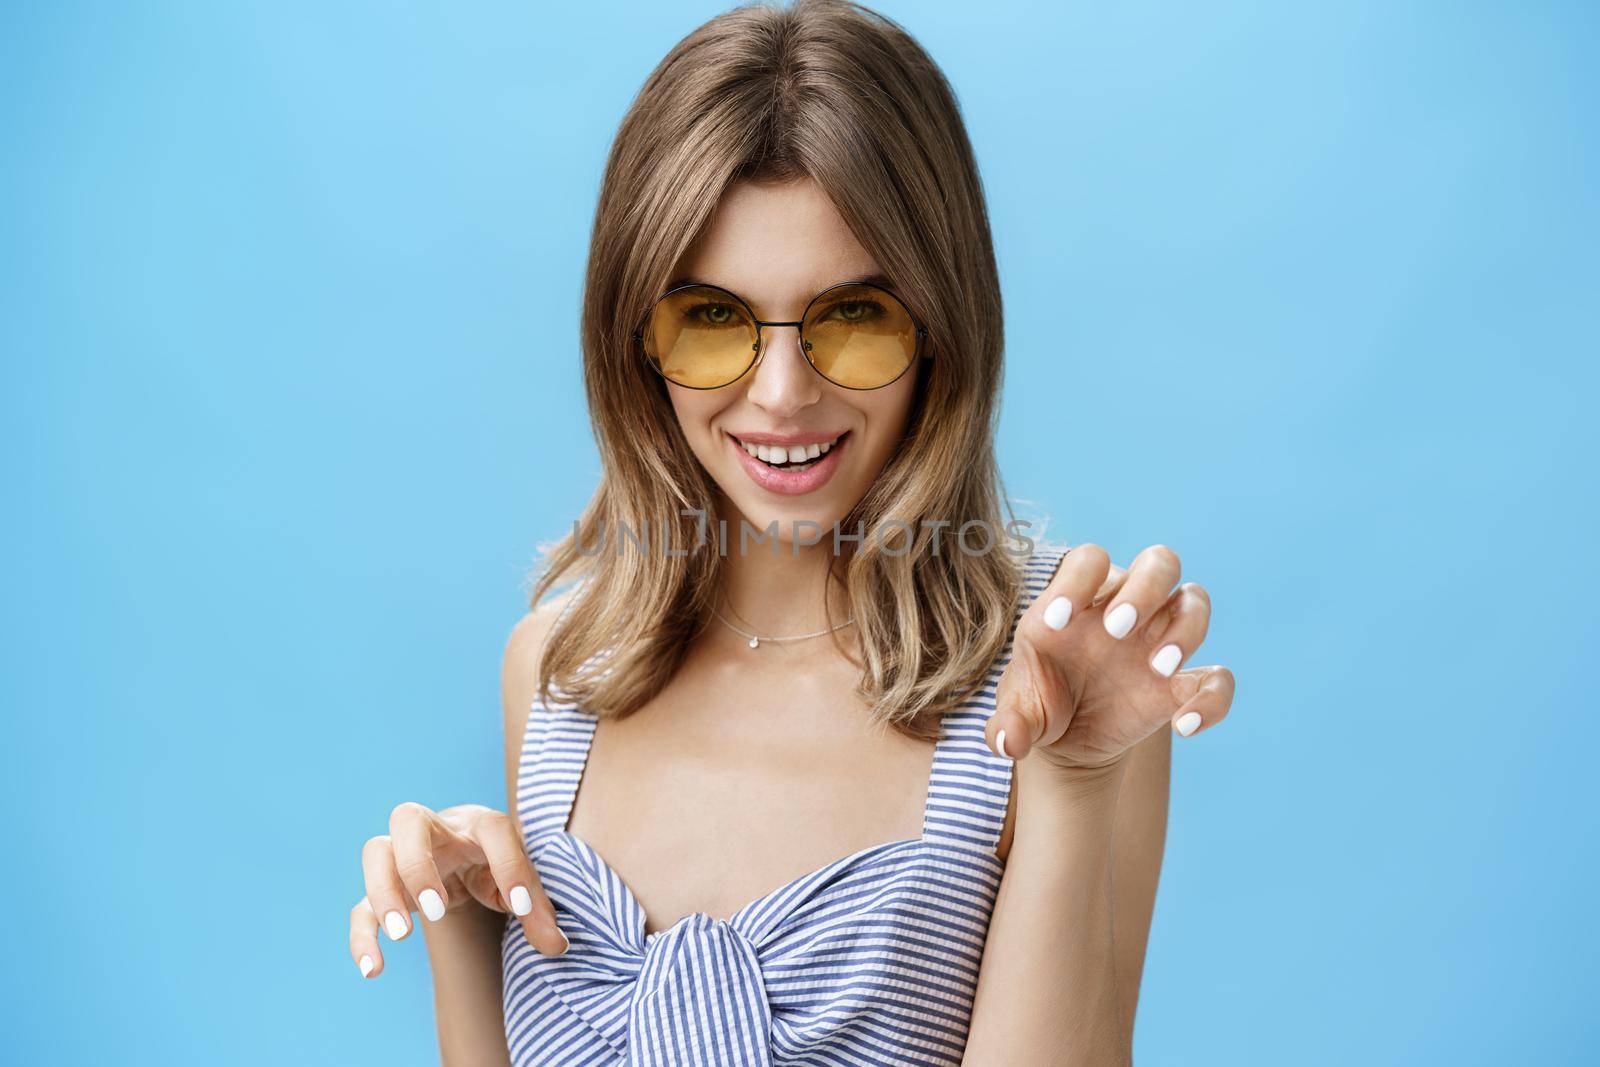 Sensual woman feeling like attractive wild cat raising hands like paws saying meow looking daring and flirty at camera, seducing with confident gaze, wearing stylish sunglasses and striped top by Benzoix